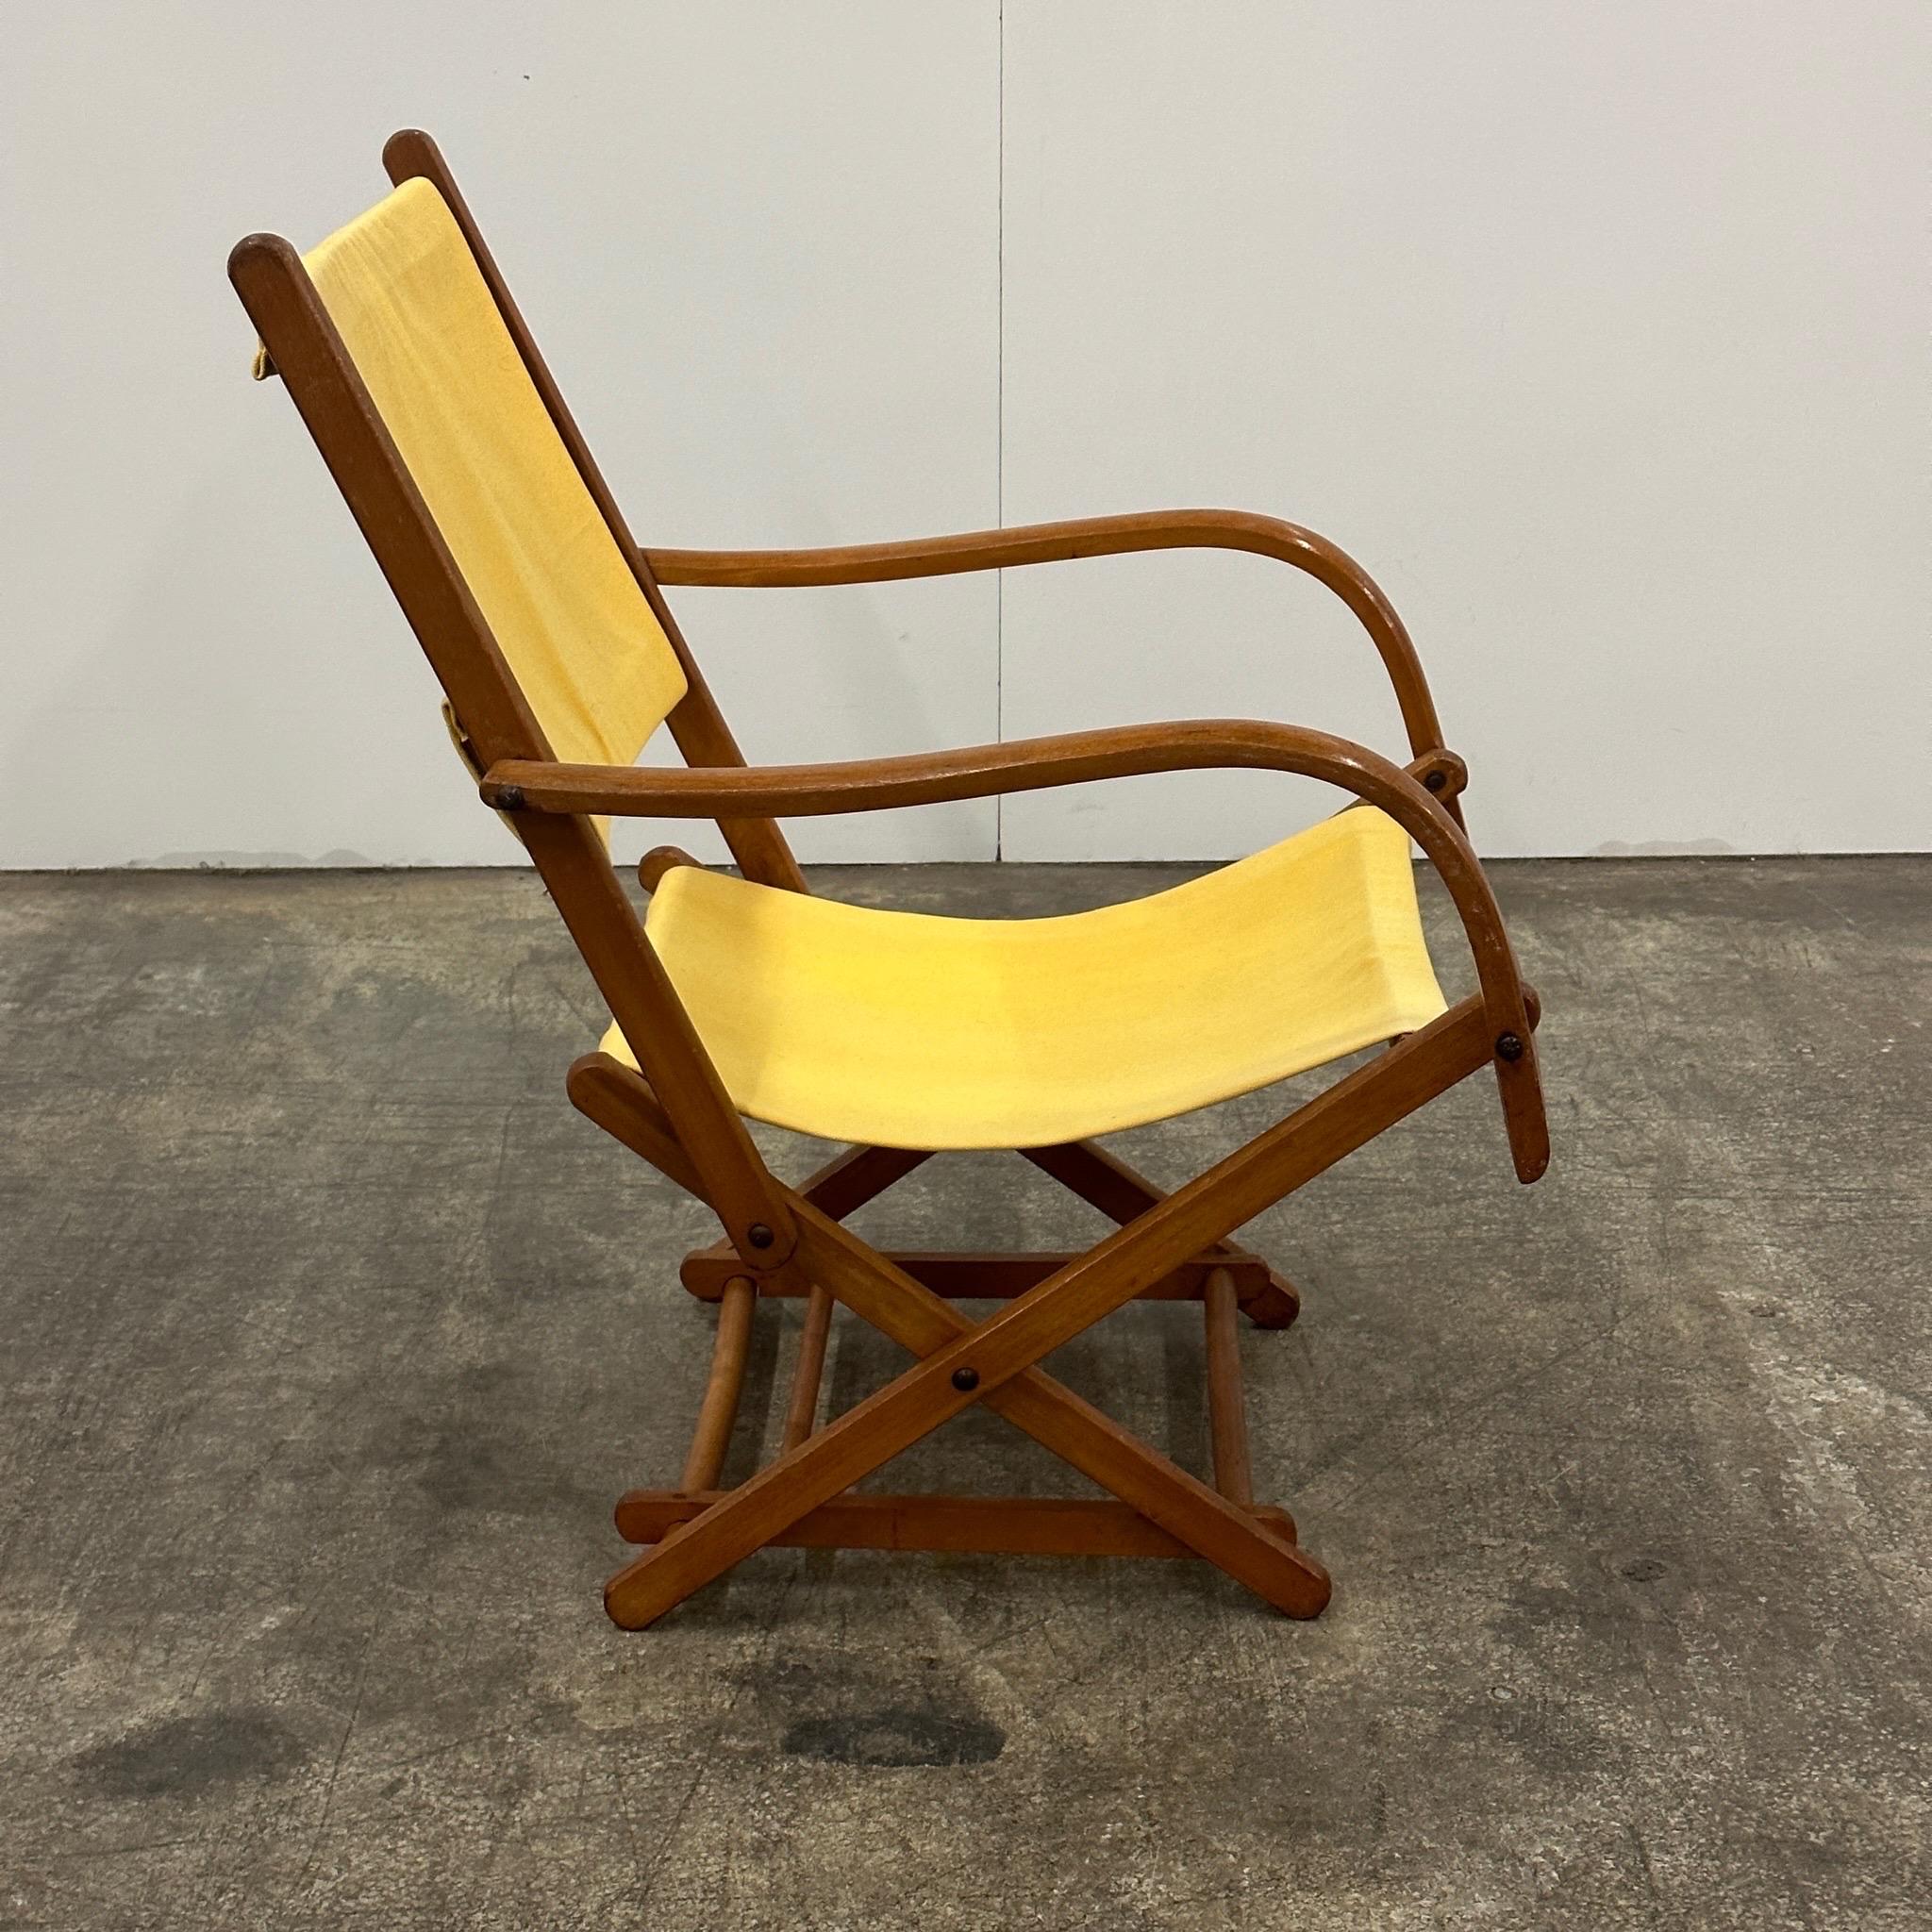 Mid-20th Century Vintage Danish Folding Chair by Torck For Sale